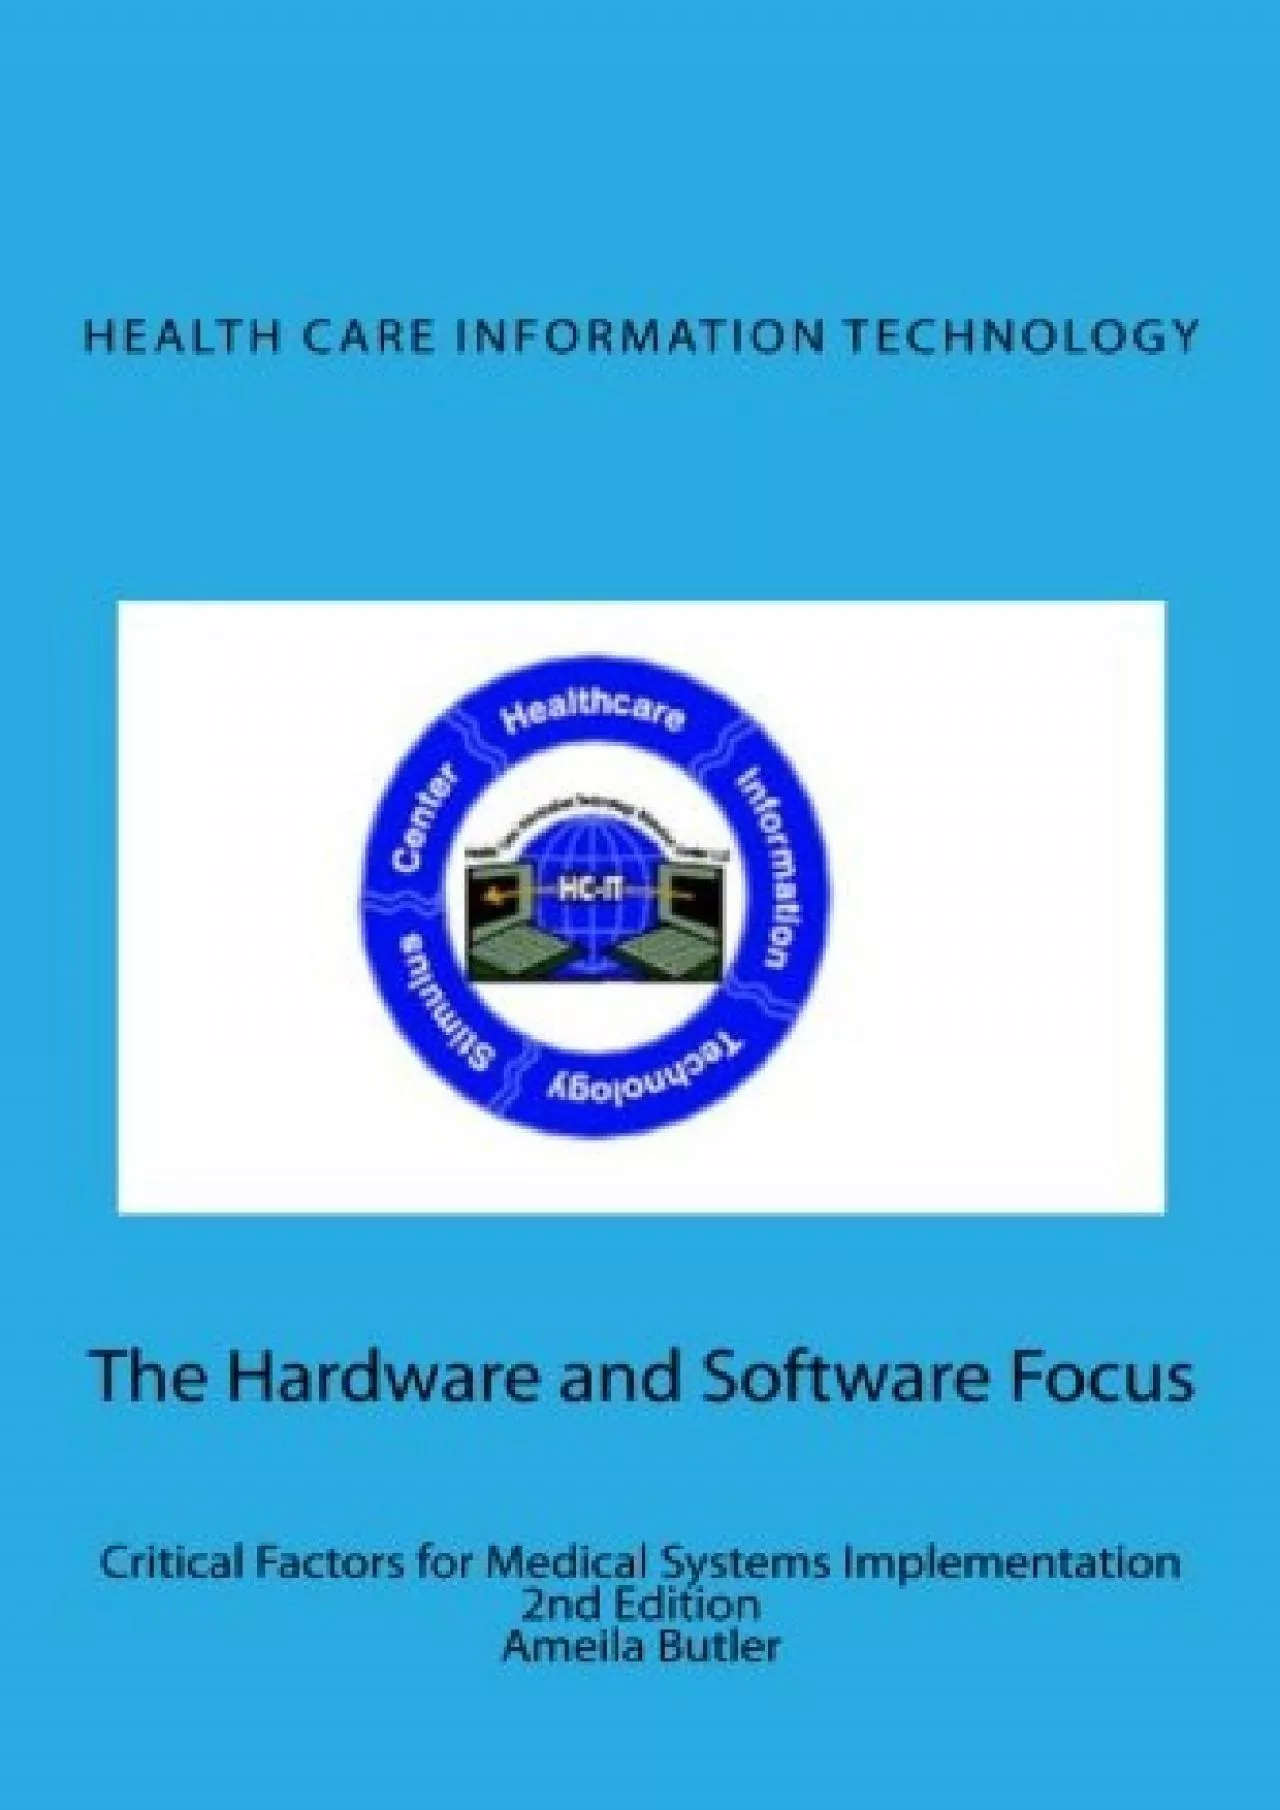 (BOOS)-Health Care Information Technology - The Hardware and Software Focus: Critical